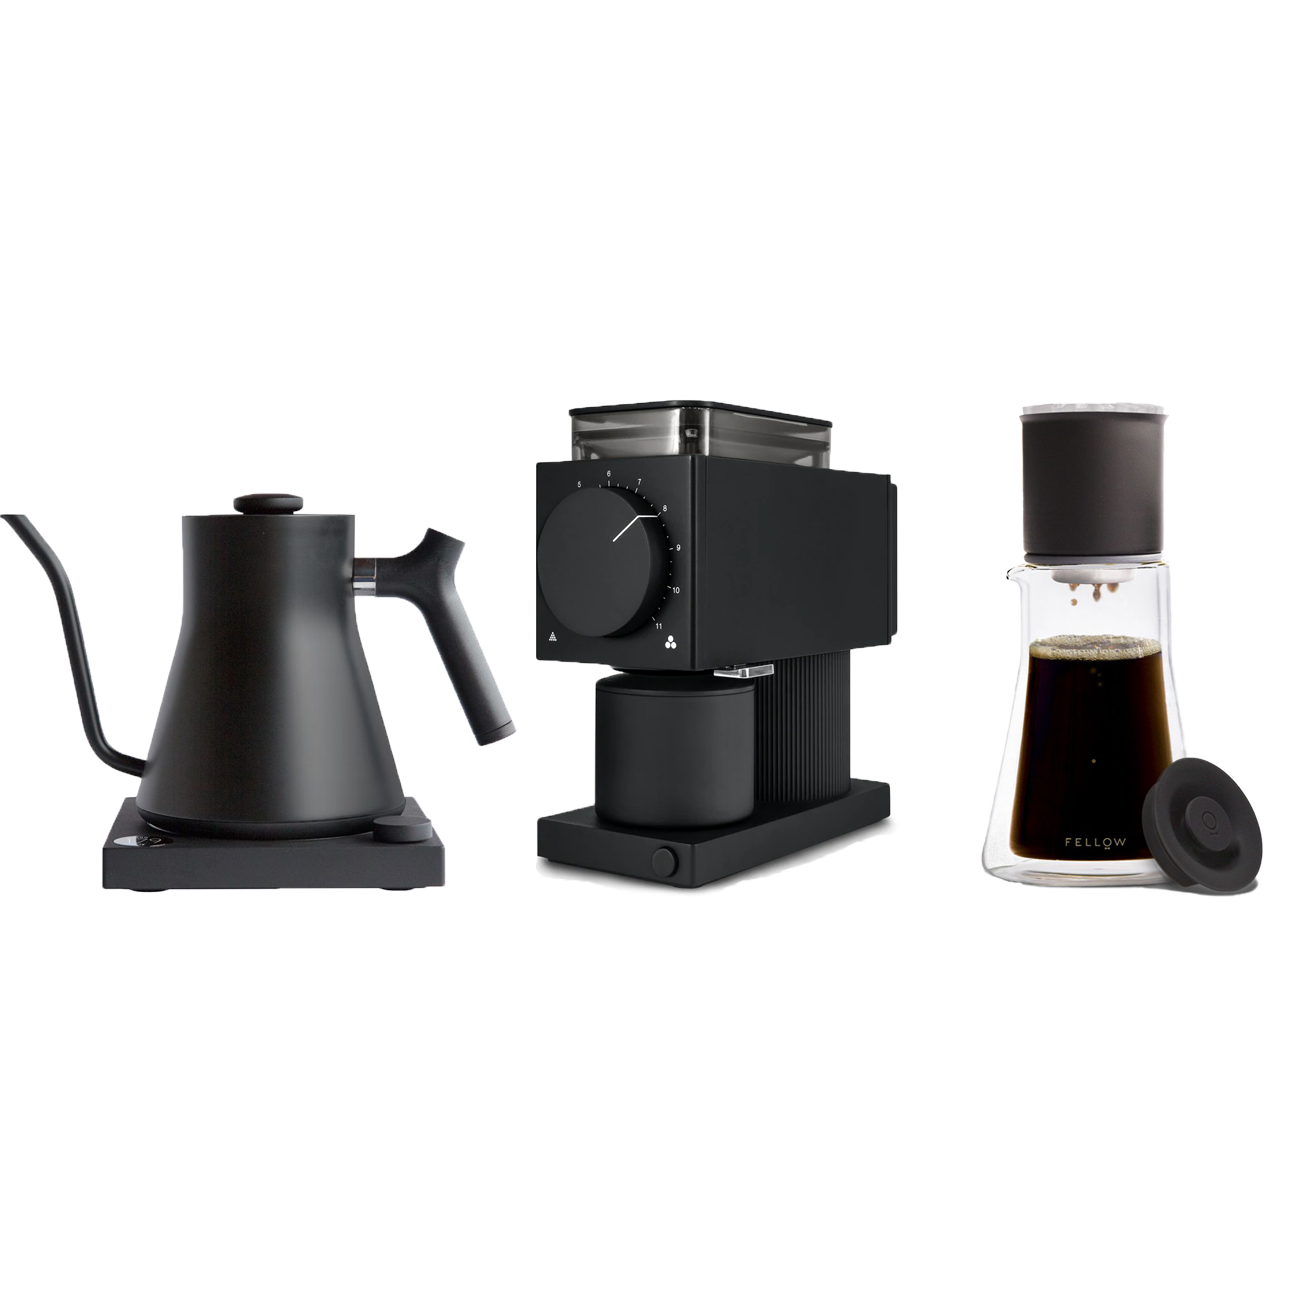 Complete Pour-Over Coffee Kit Pour-Over Coffee Set Kettle Grinder Scale